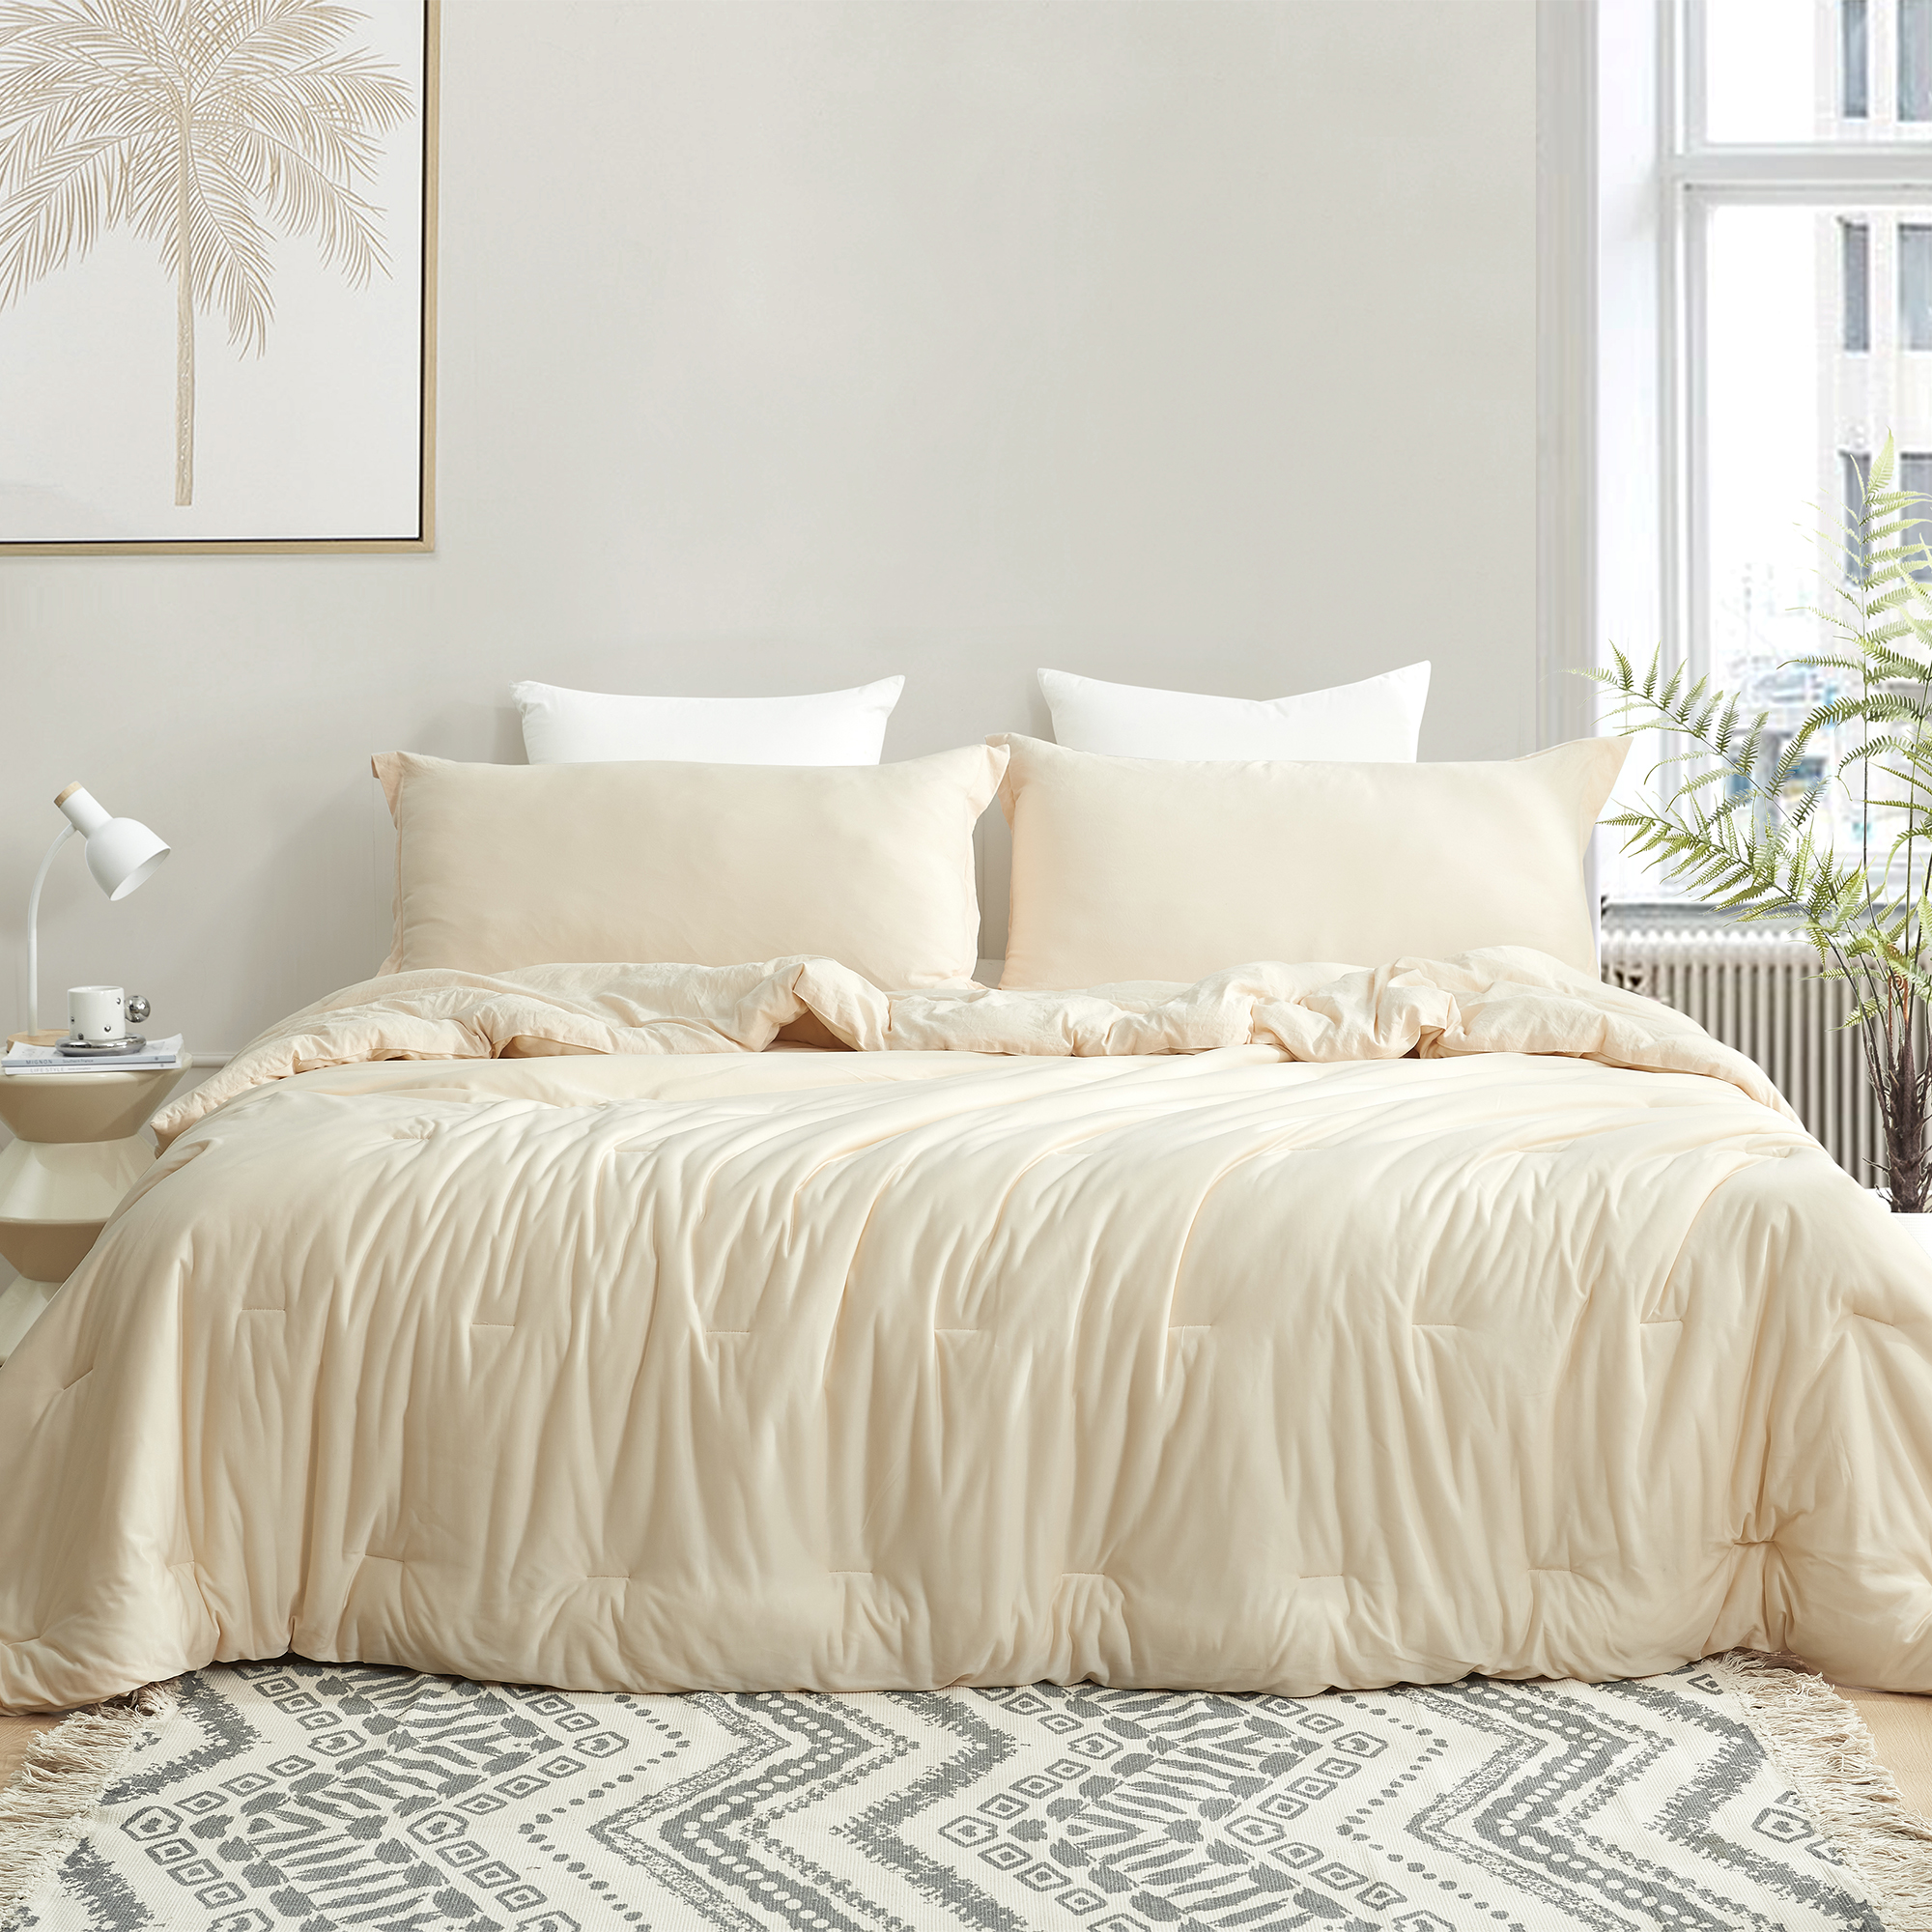 Calm Cool Collection - Coma Inducer® Oversized King Comforter - Linen Beige